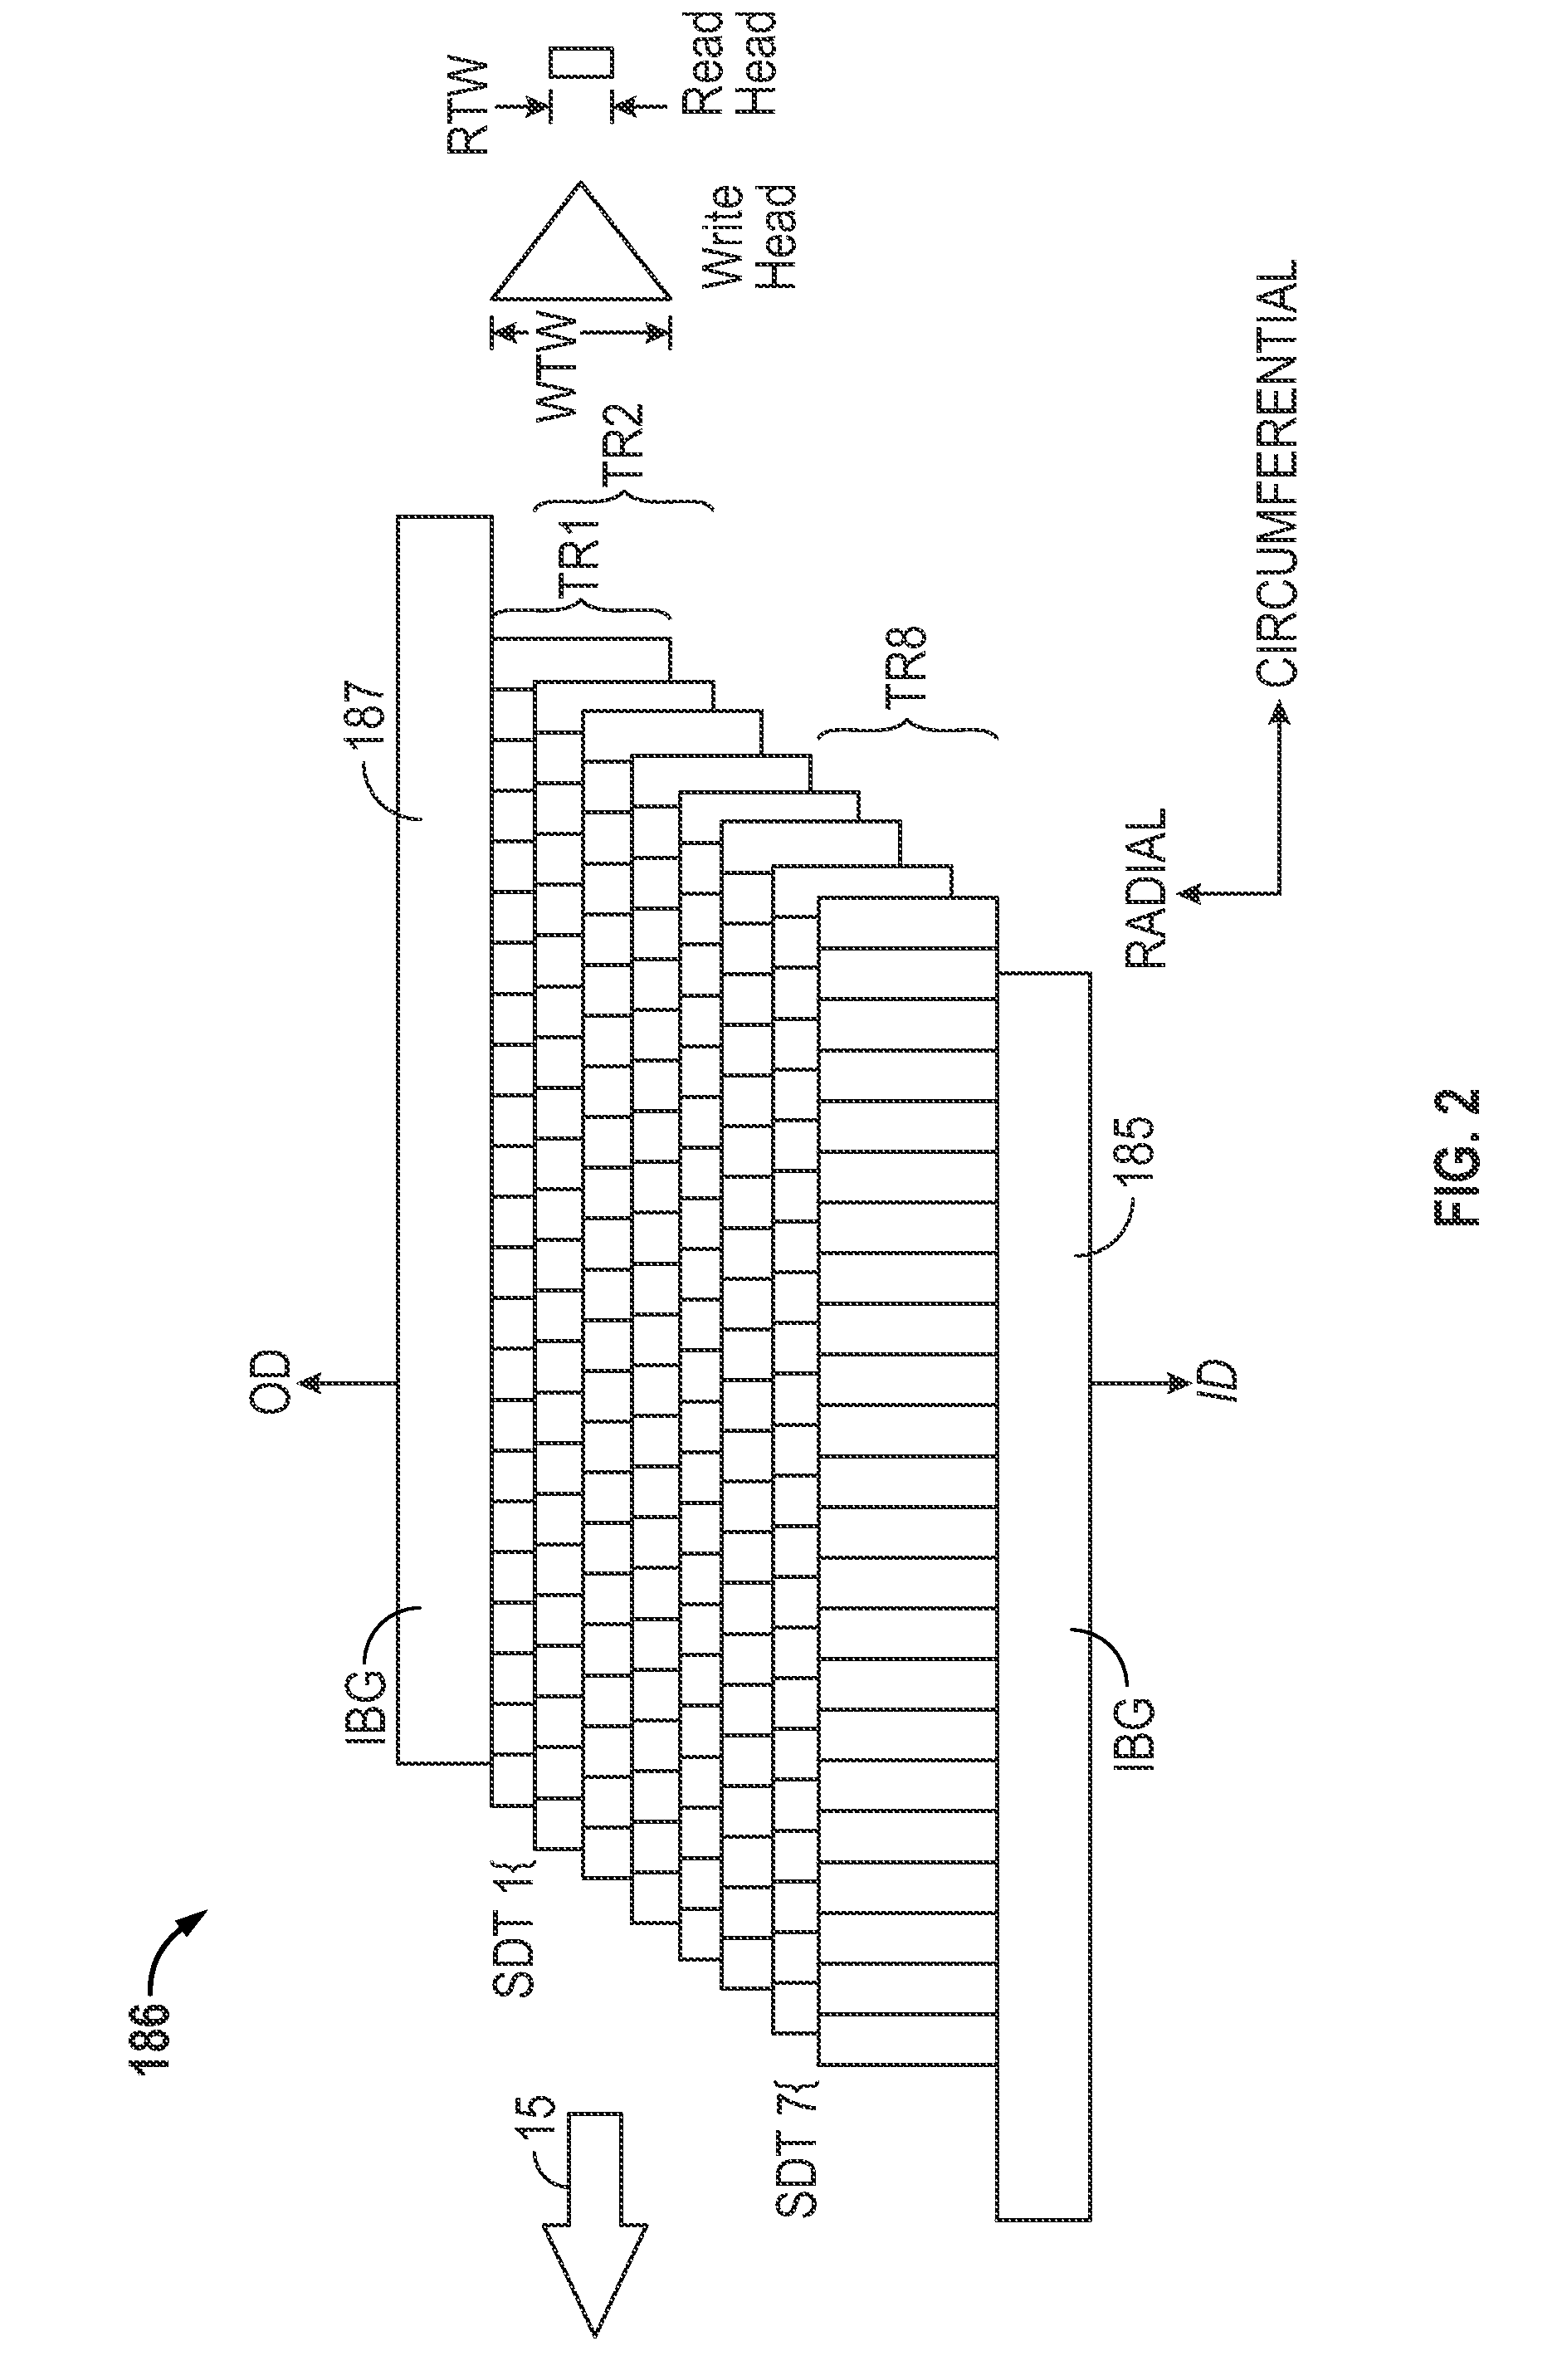 Shingled magnetic recording disk drive with compensation for the effect of far track erasure (FTE) on adjacent data bands